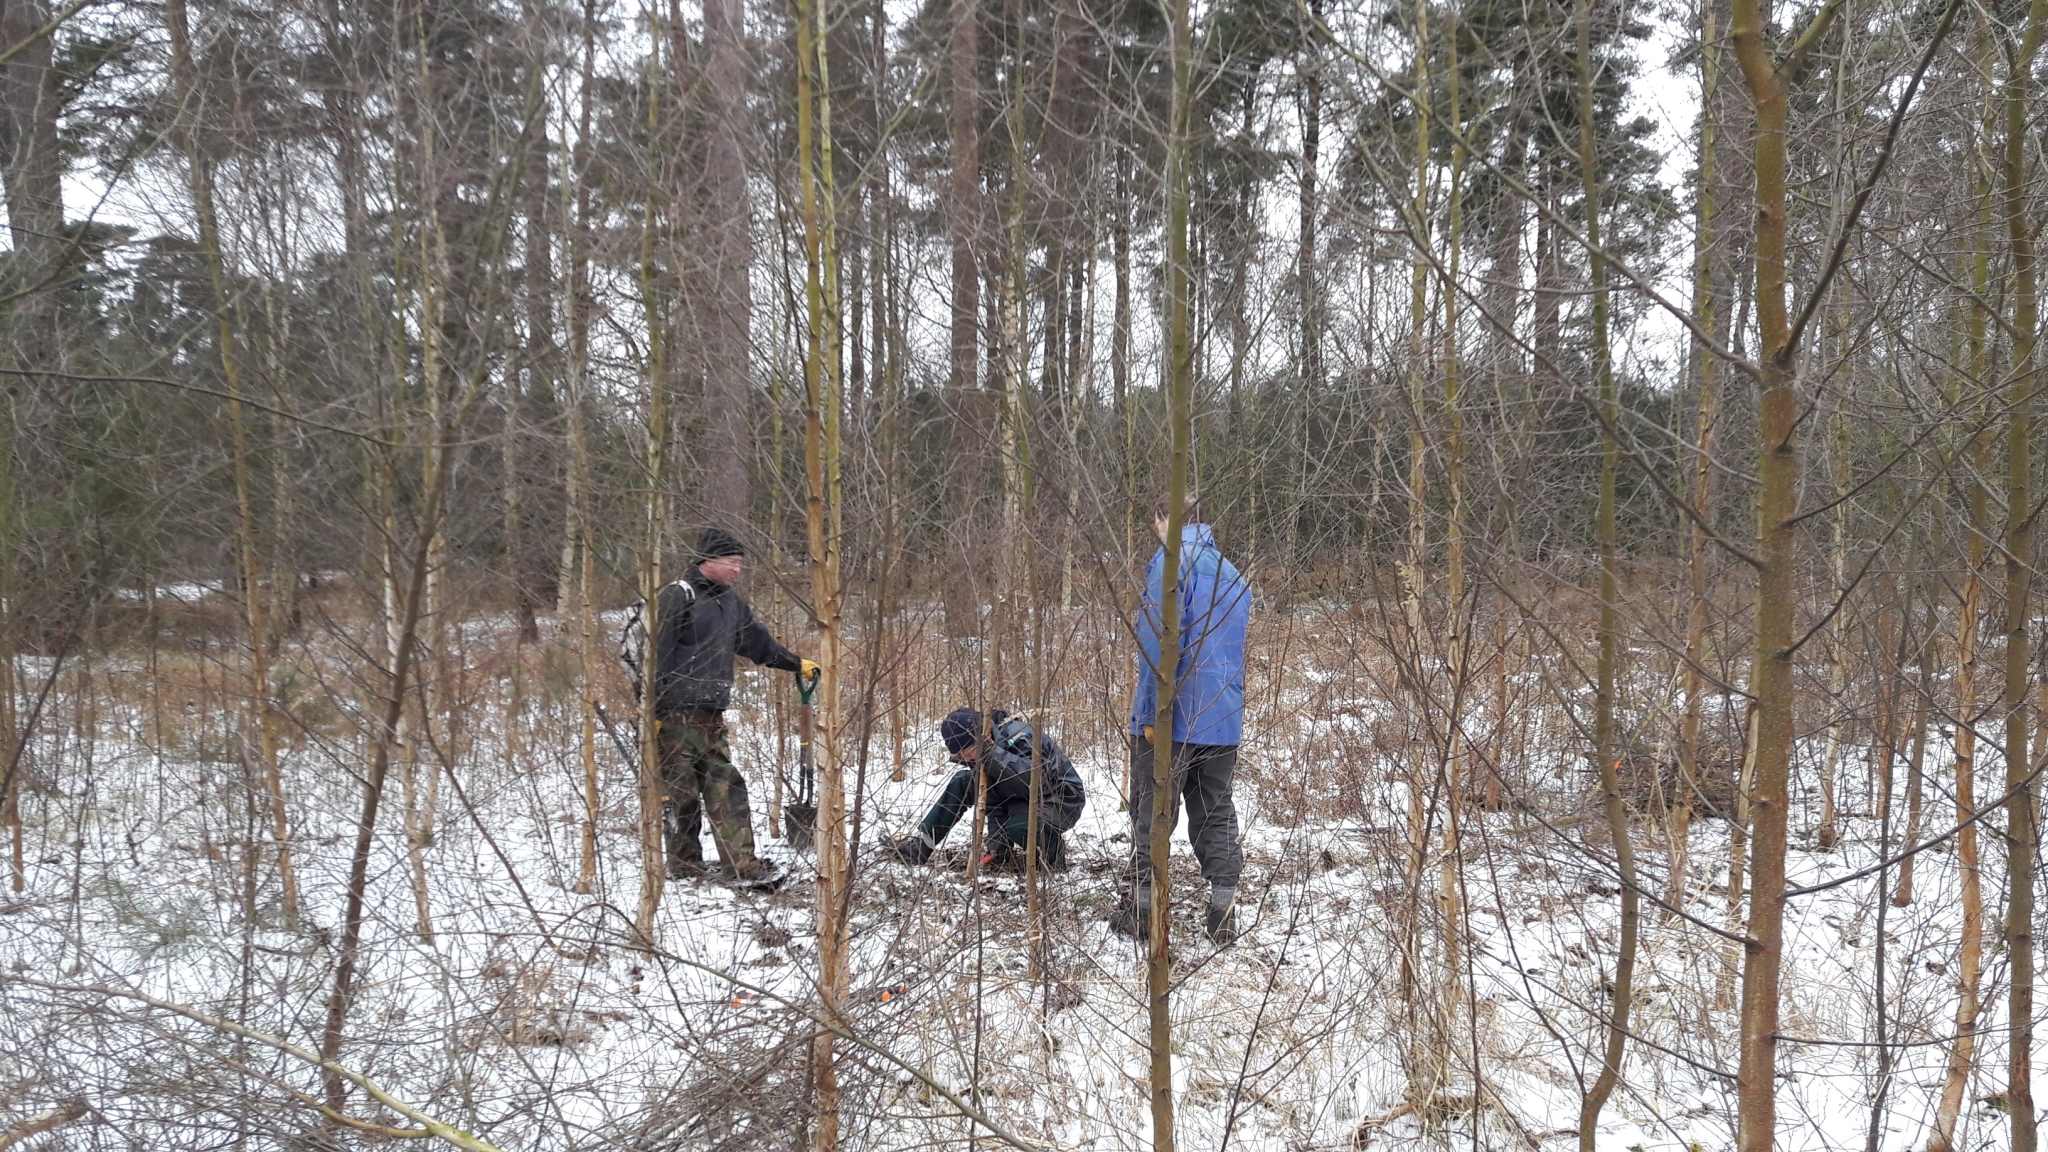 A photo from the FoTF Conservation Event - March 2018 - Birch Coppicing at High Lodge : Volunteers work amongst the Birth trees